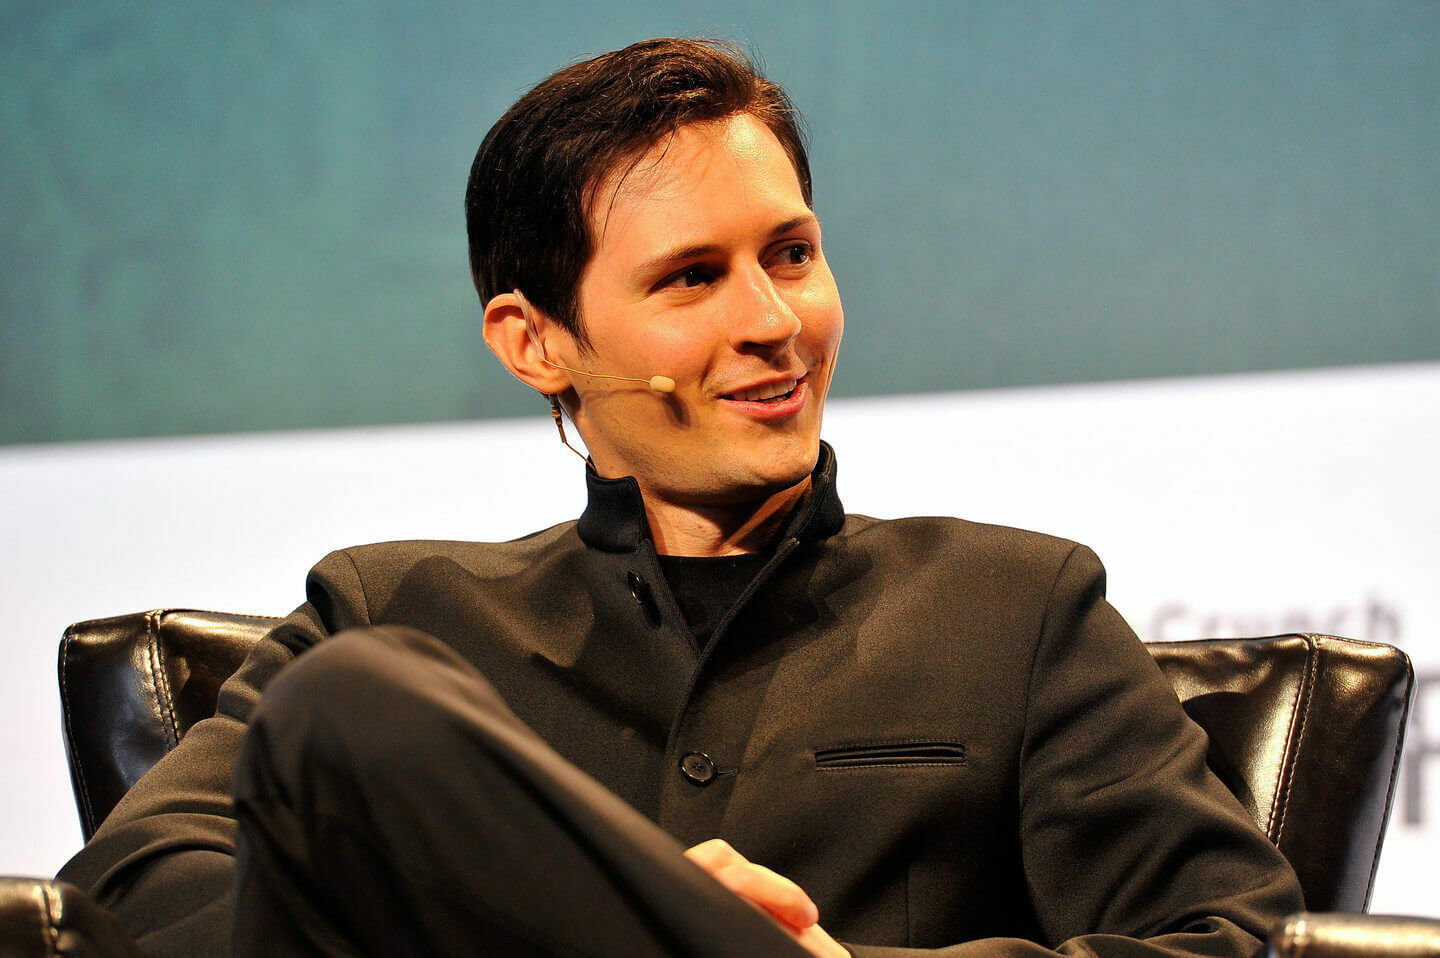 "Celery doesn't care how you look!": the web criticizes the rules of life of Pavel Durov